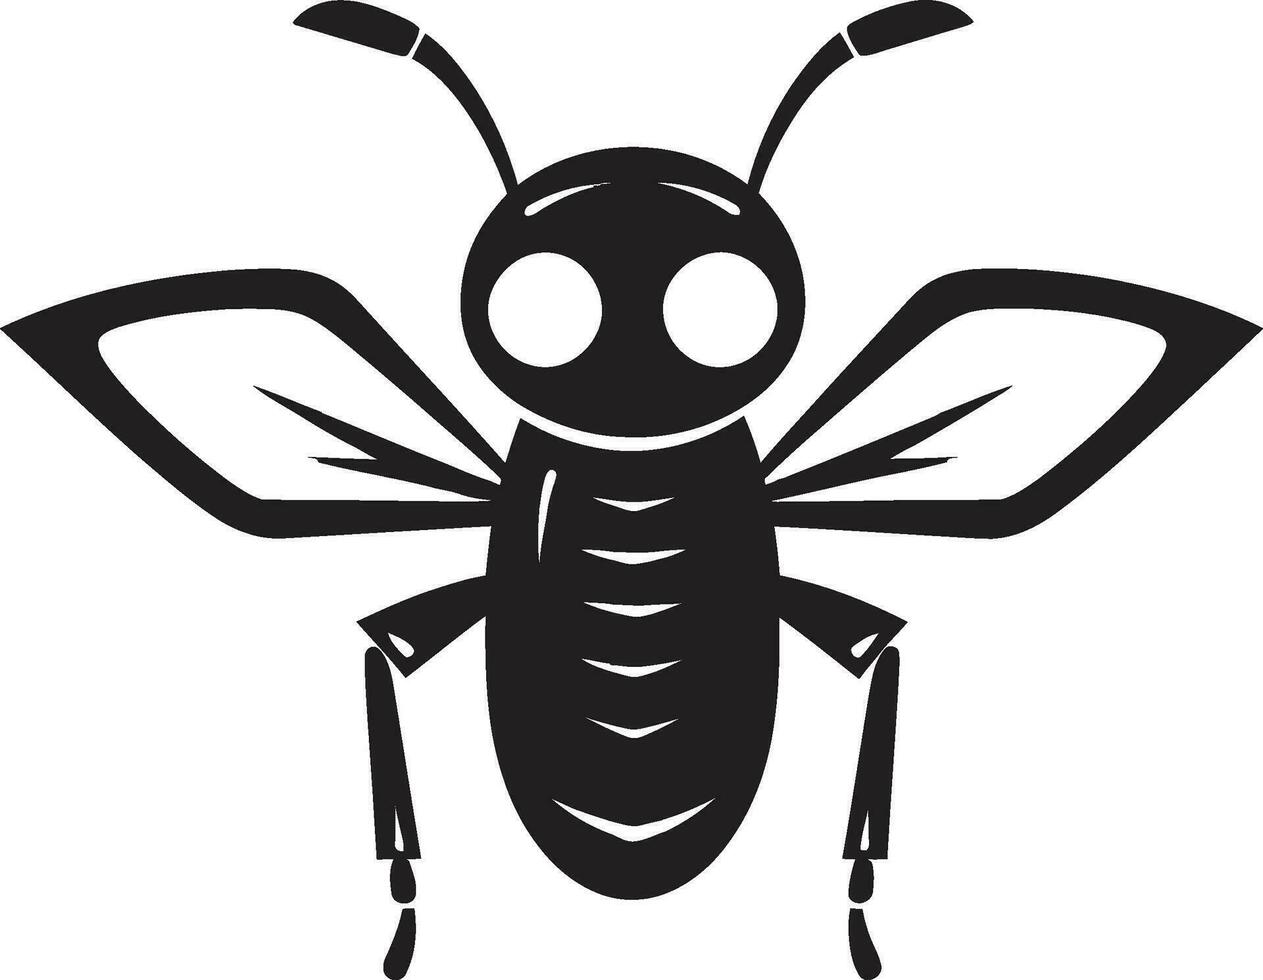 Insect Kingdom Icon Termite Majesty in Shadows vector